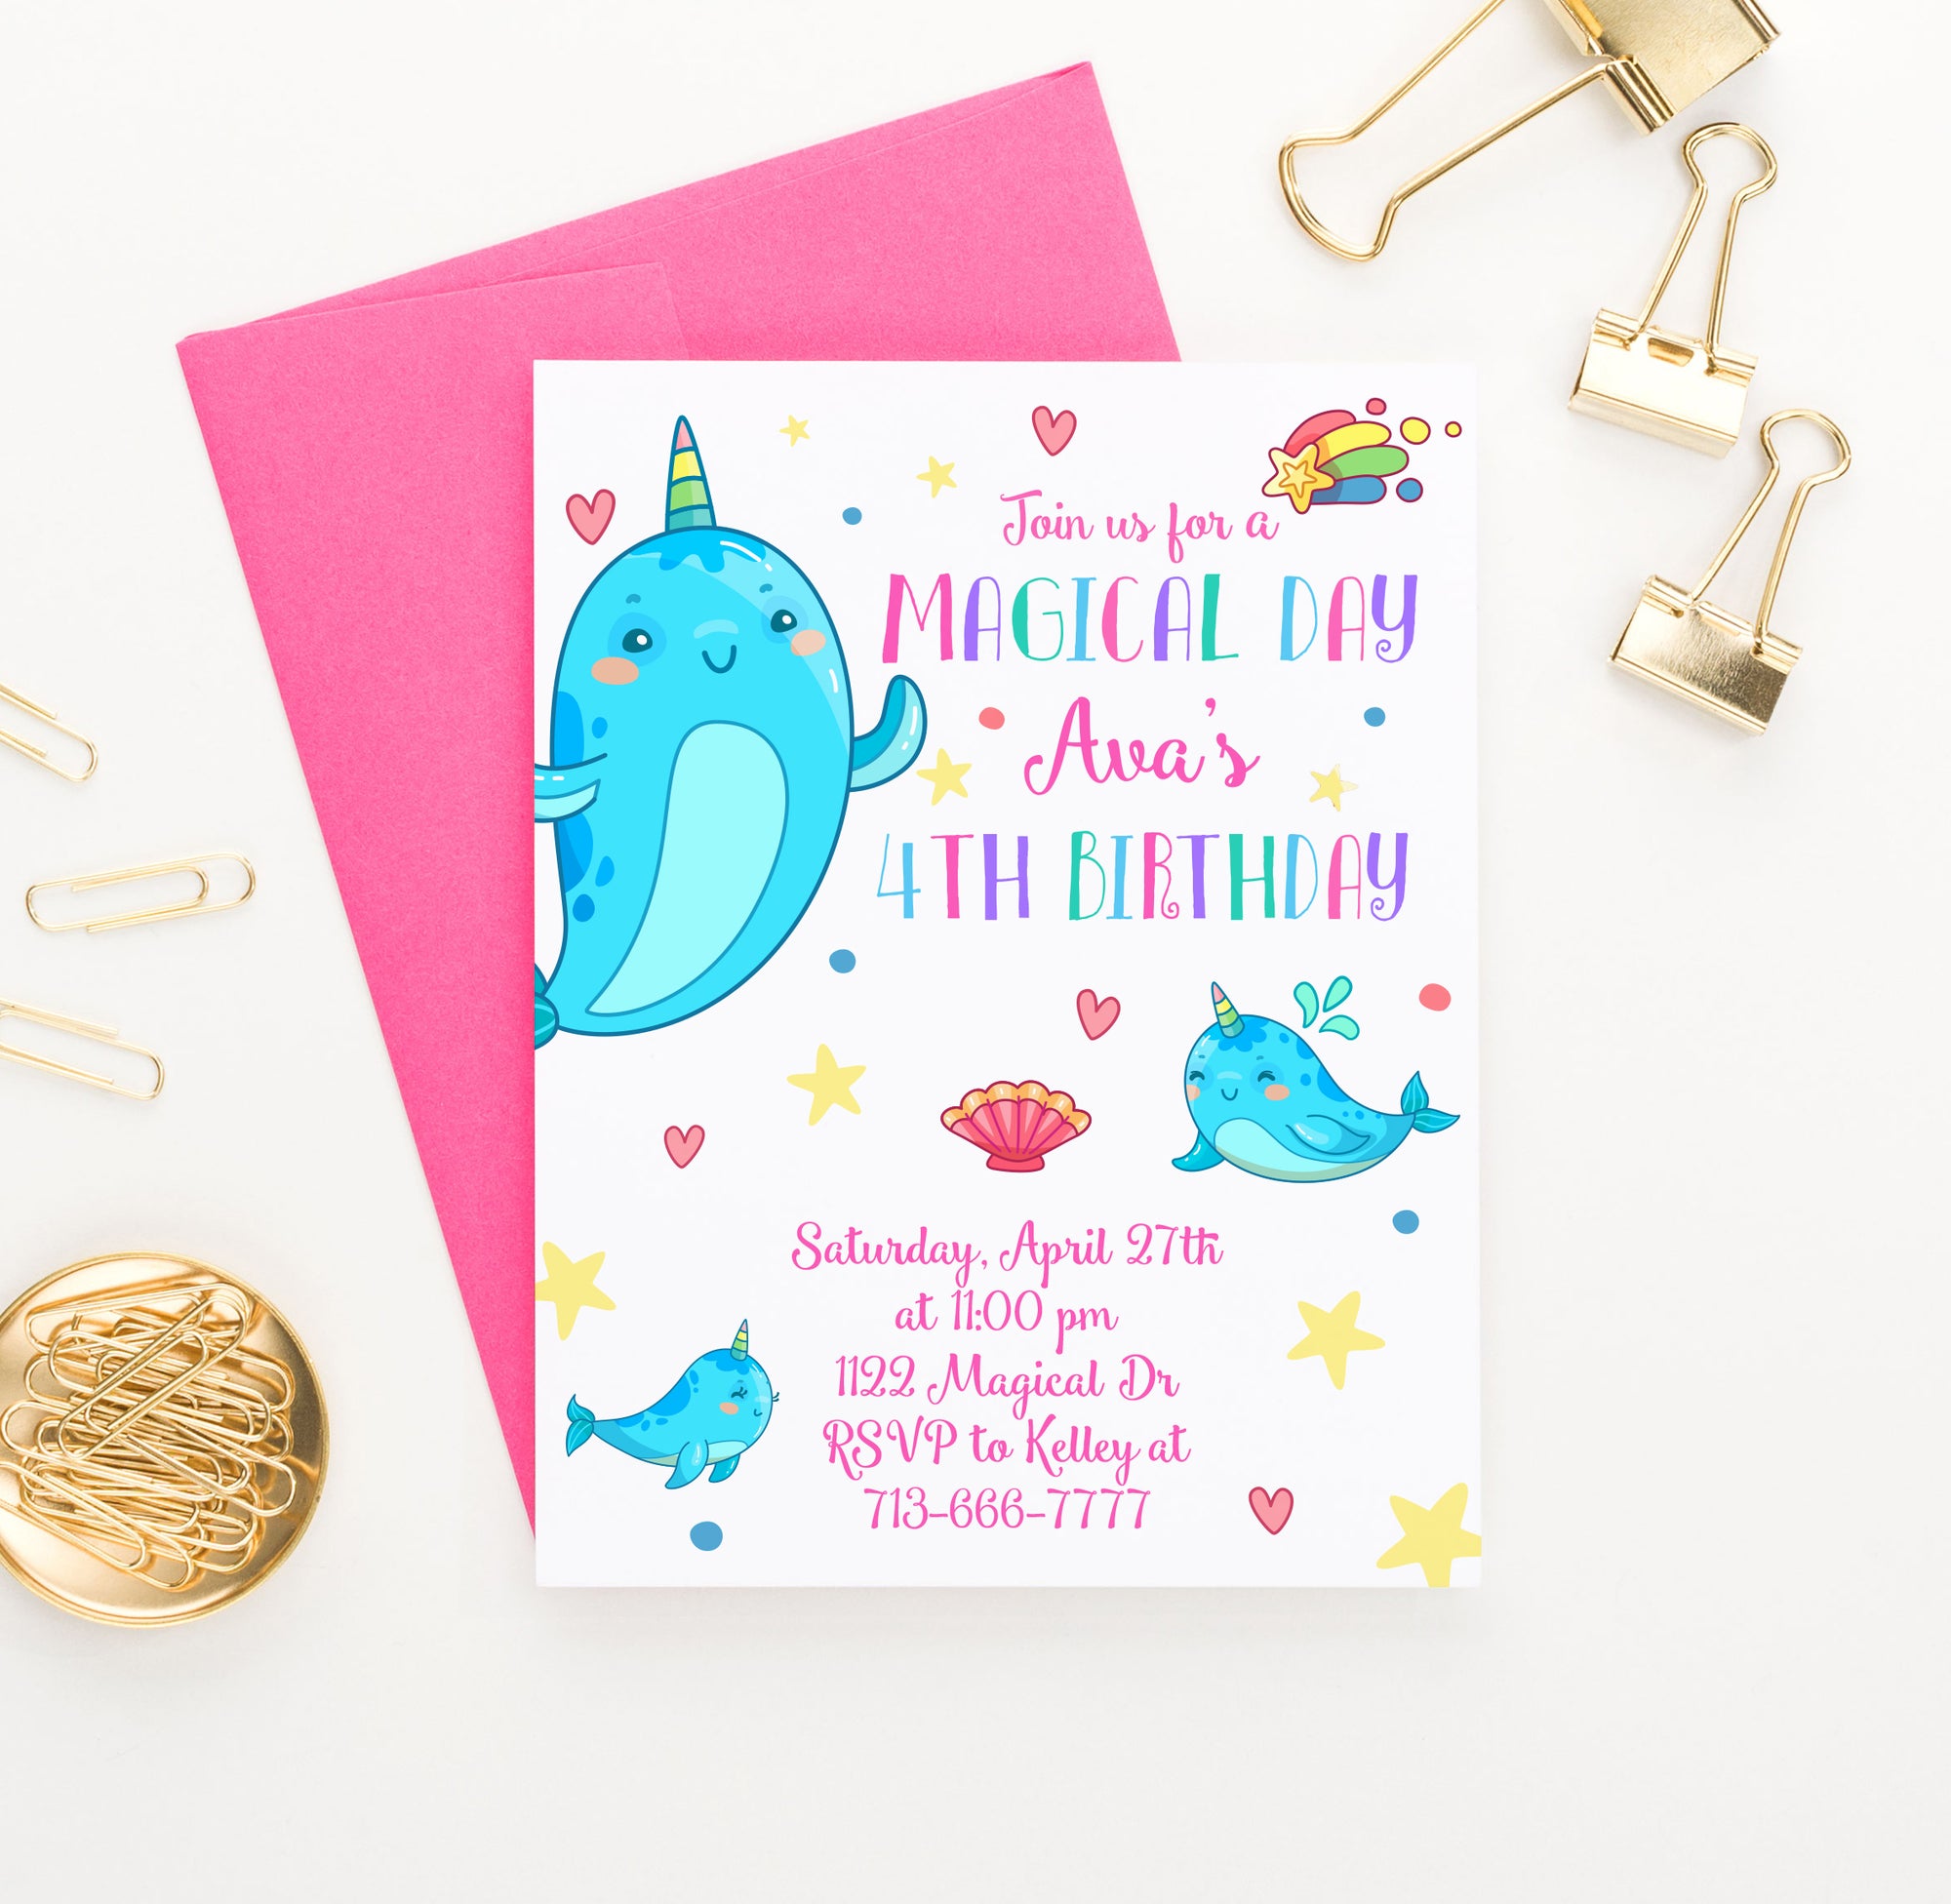 Magical Day Birthday Party Invitations With Narwhals